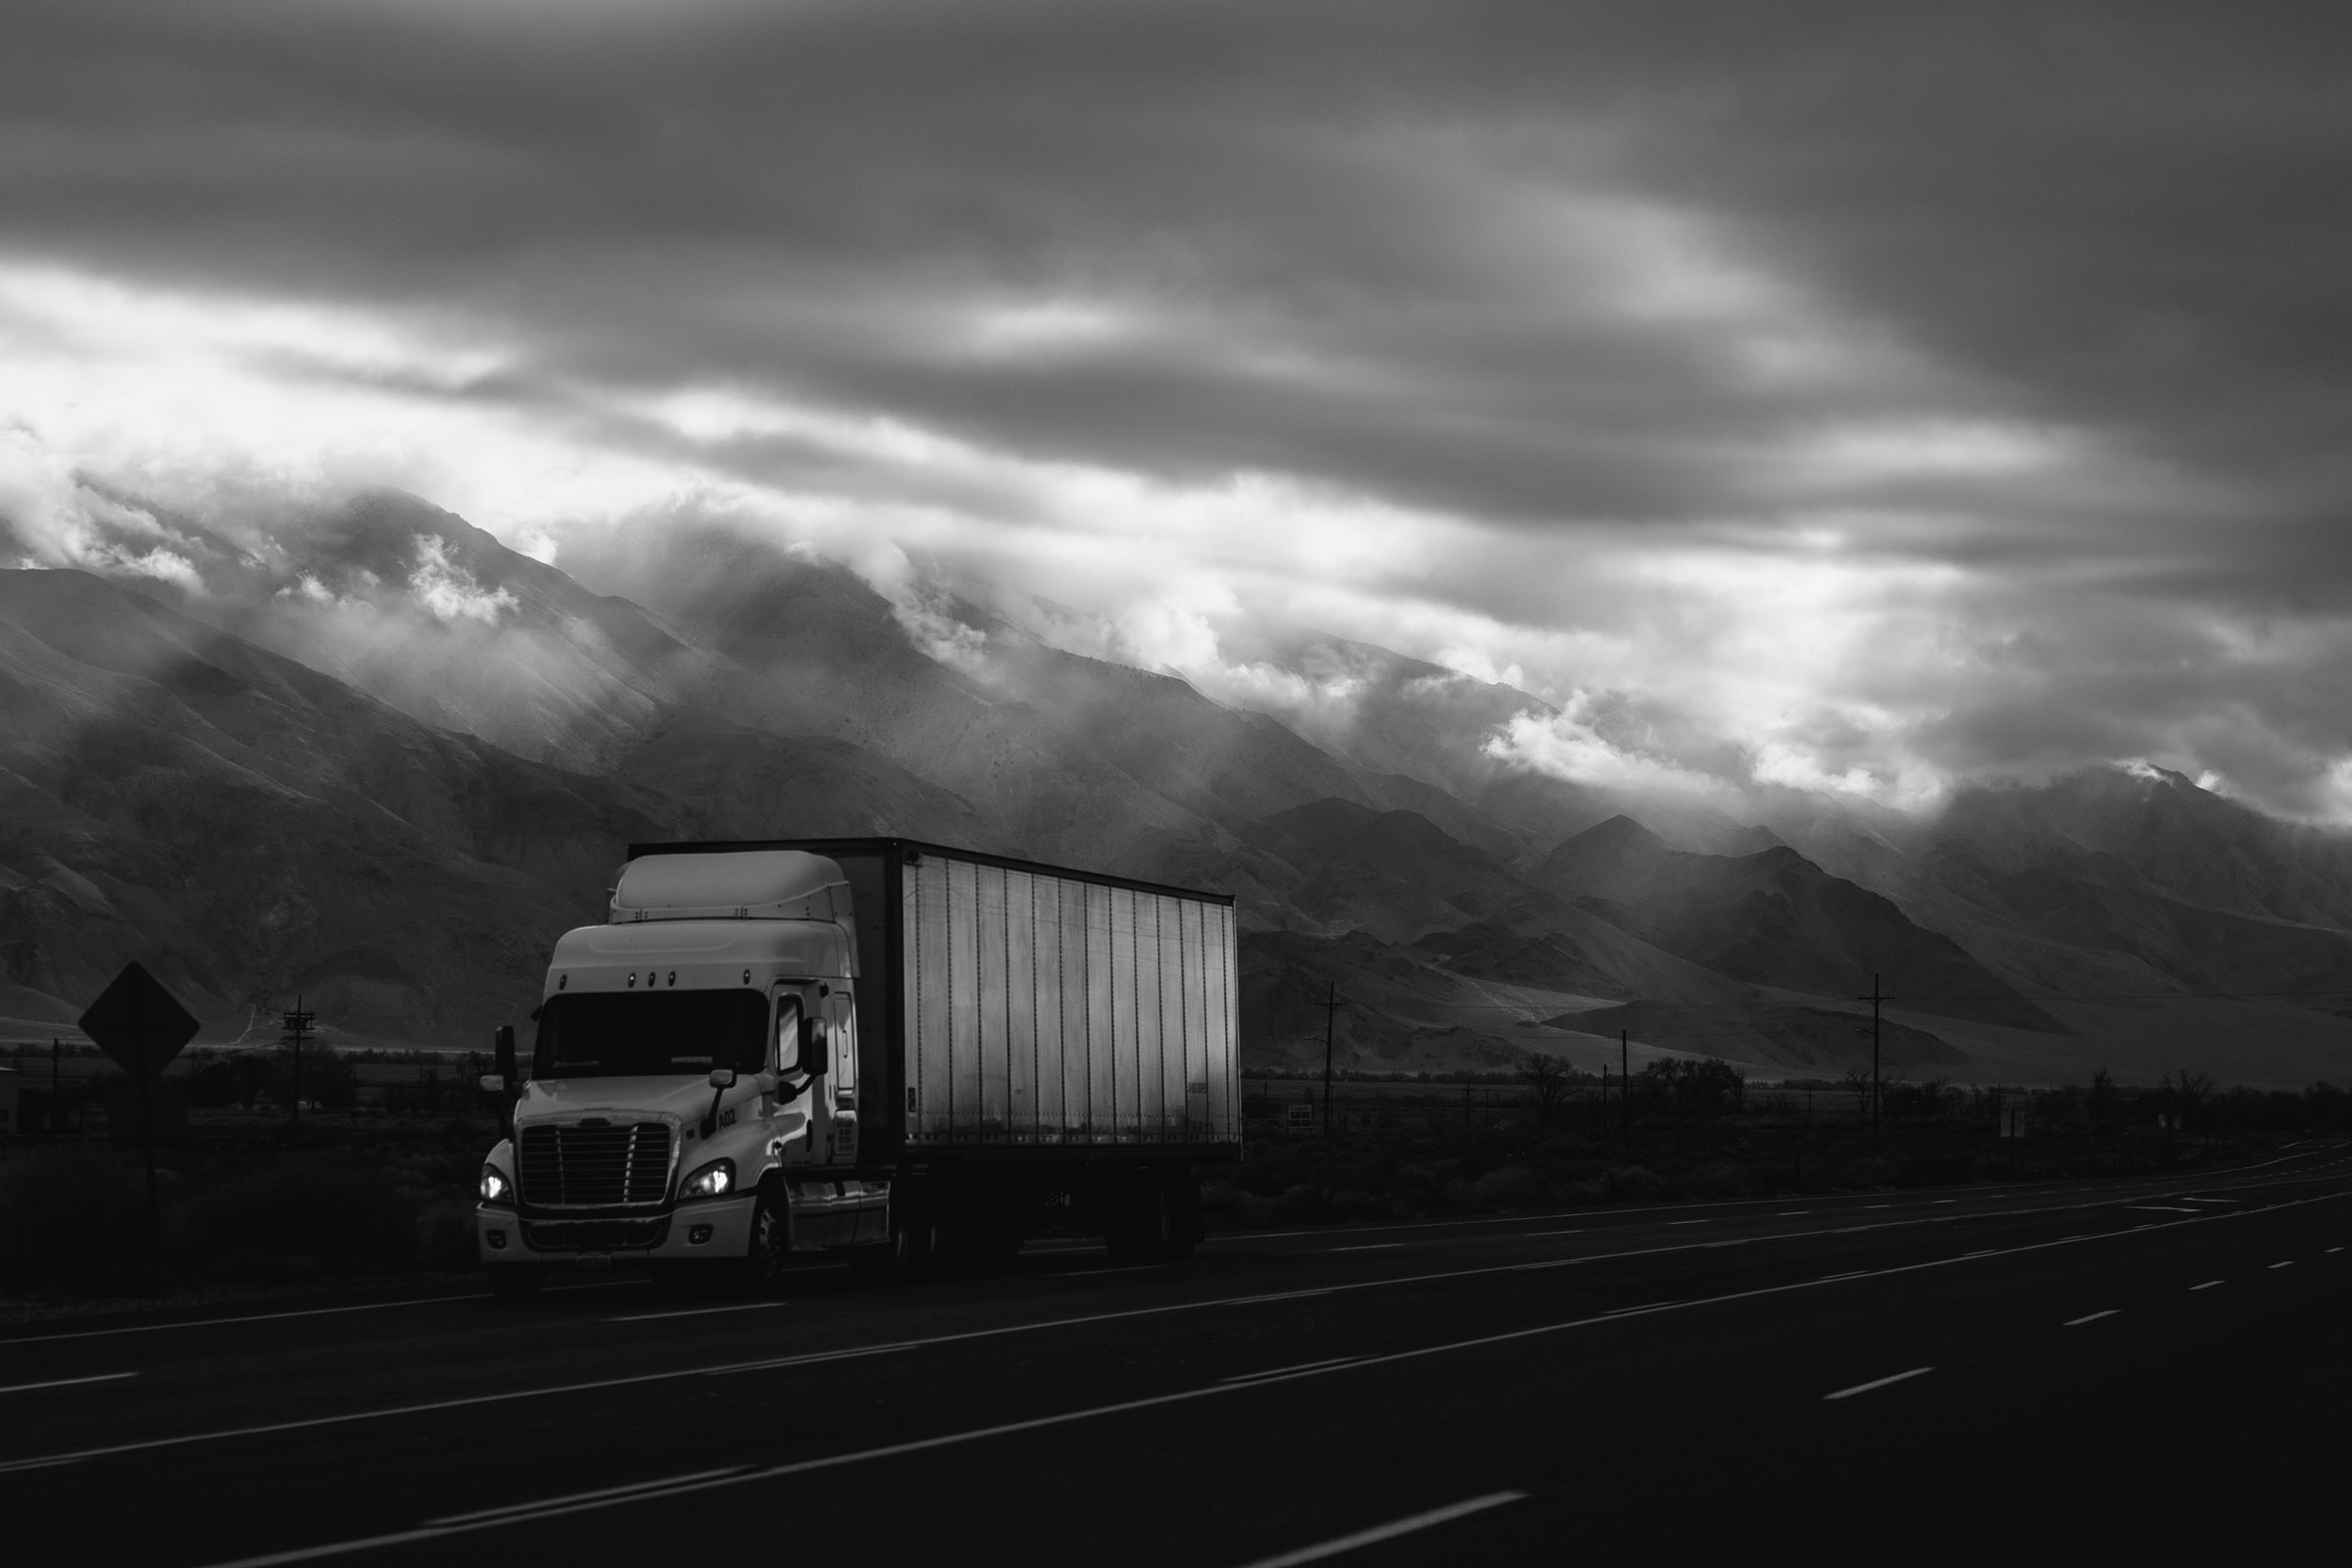 A truck driving in front of mountains shrouded in fog